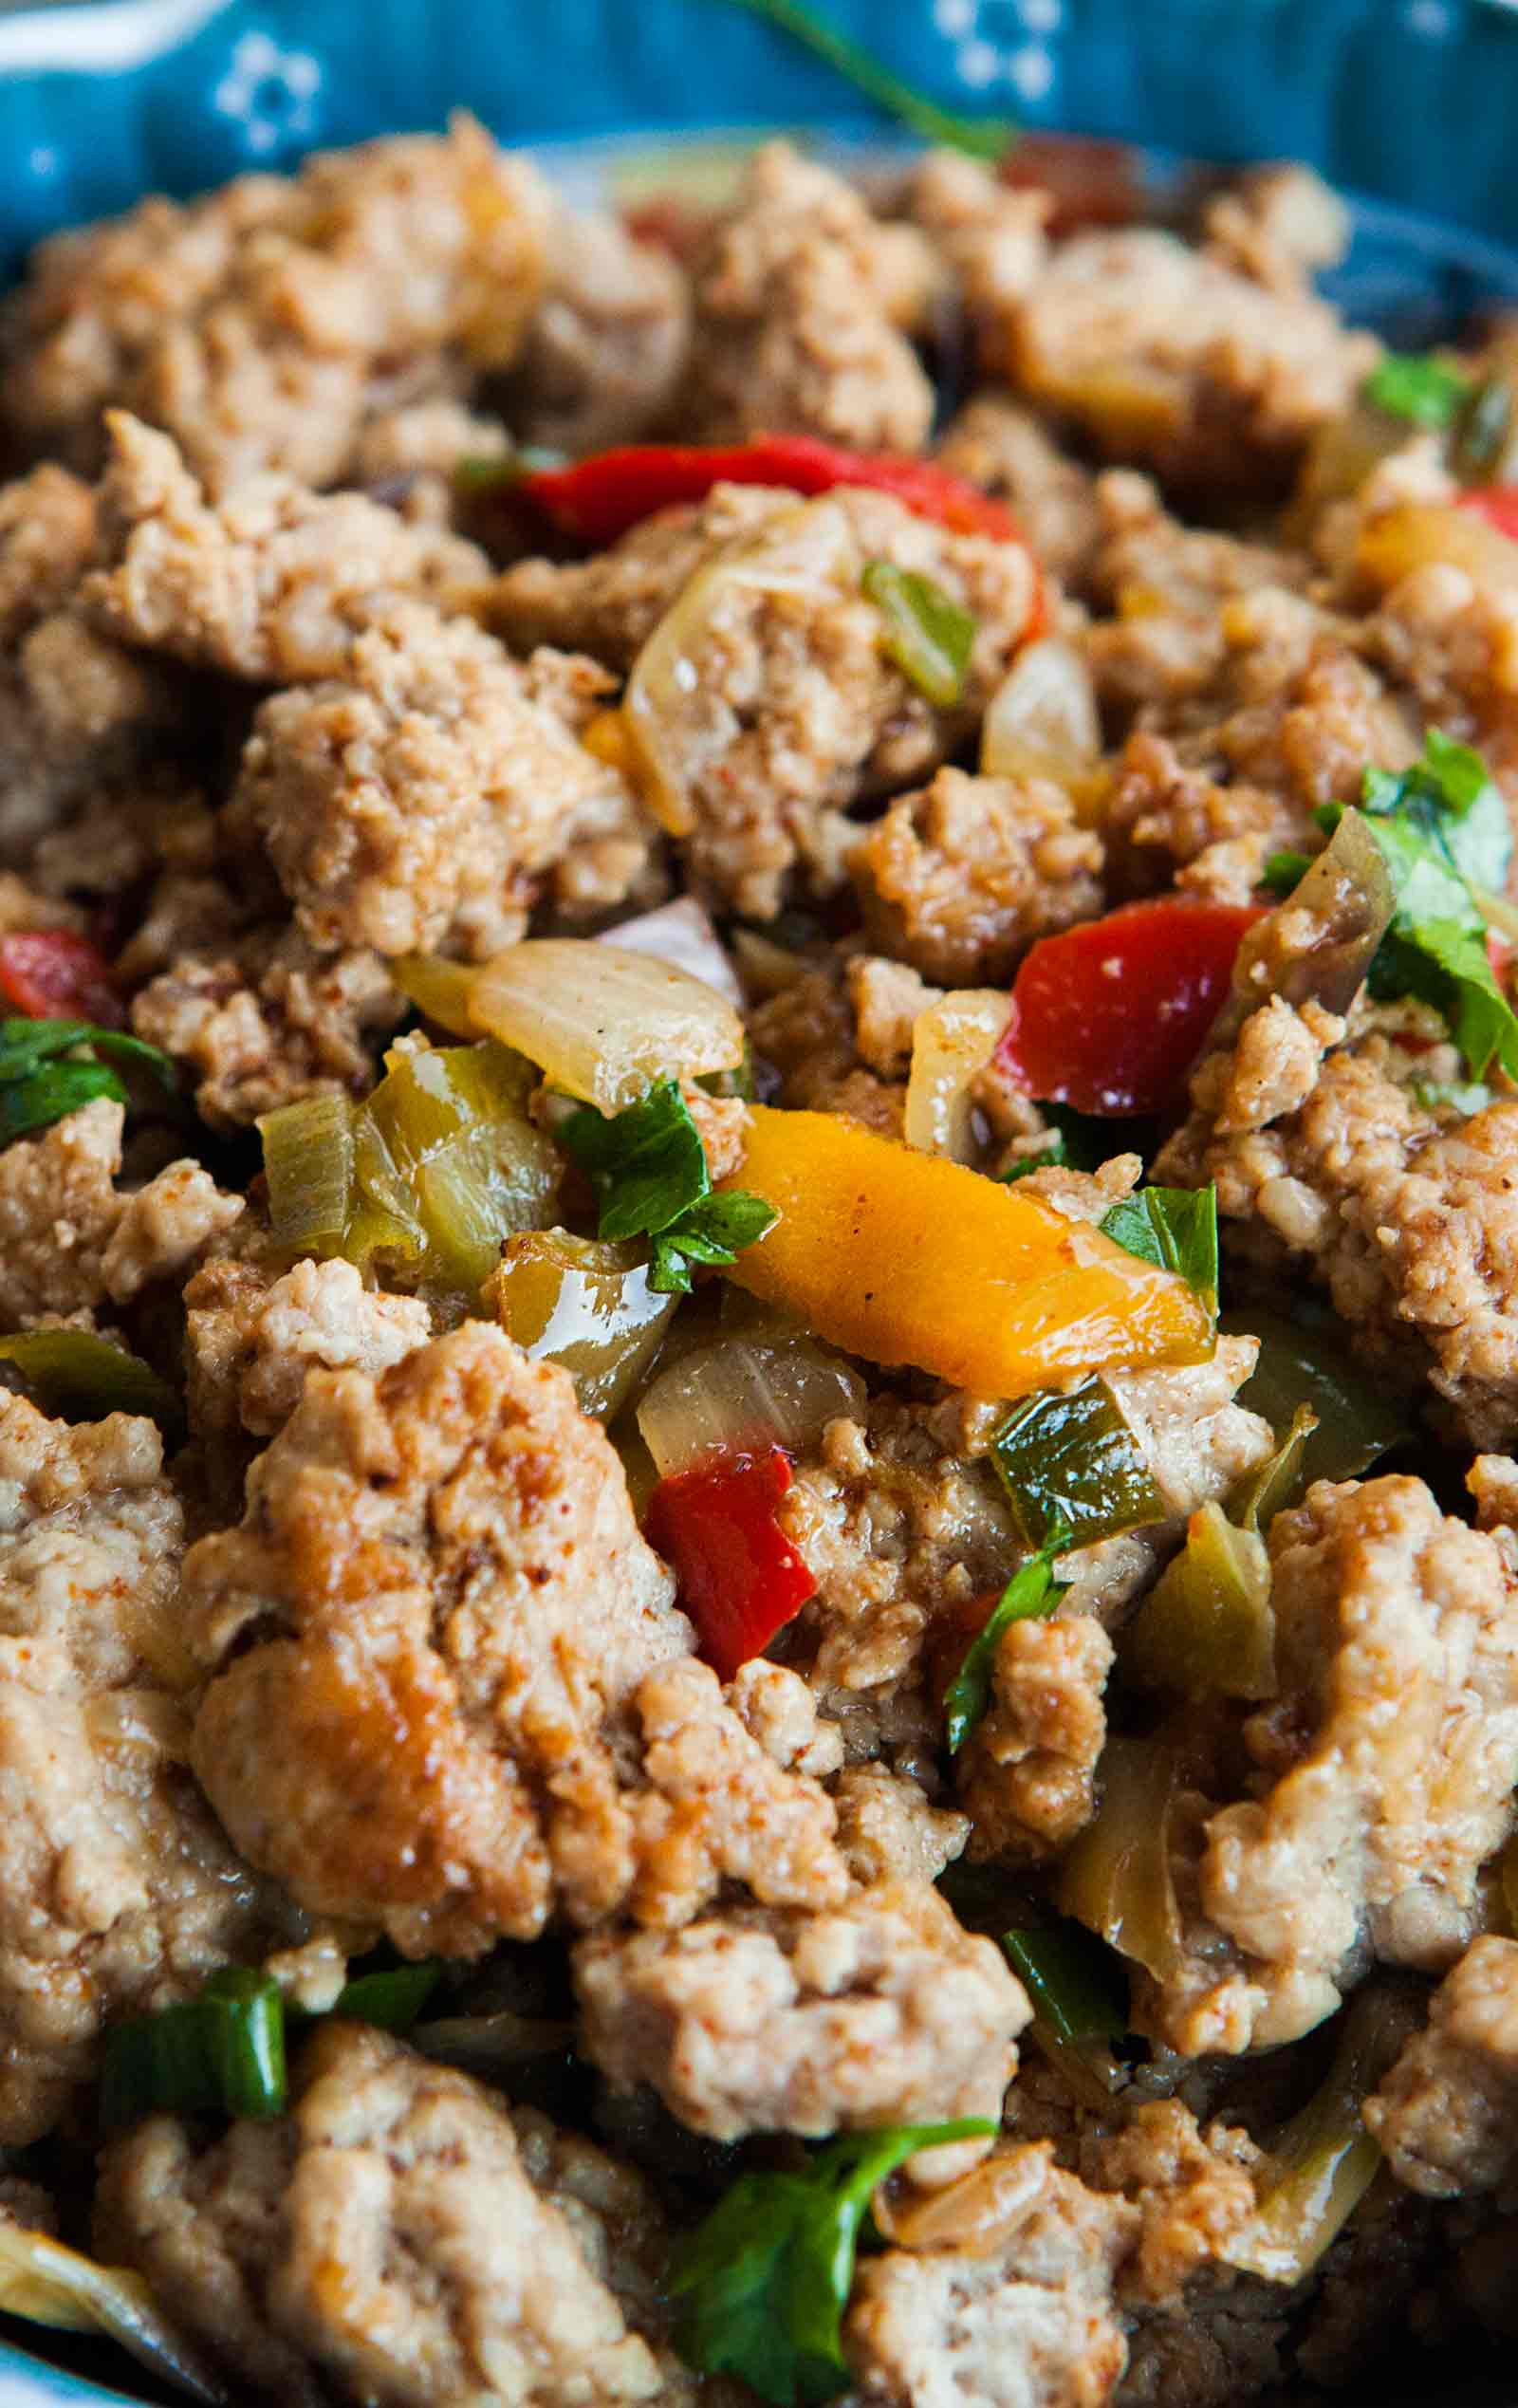 Recipe With Ground Turkey
 Mom’s Ground Turkey and Peppers Recipe